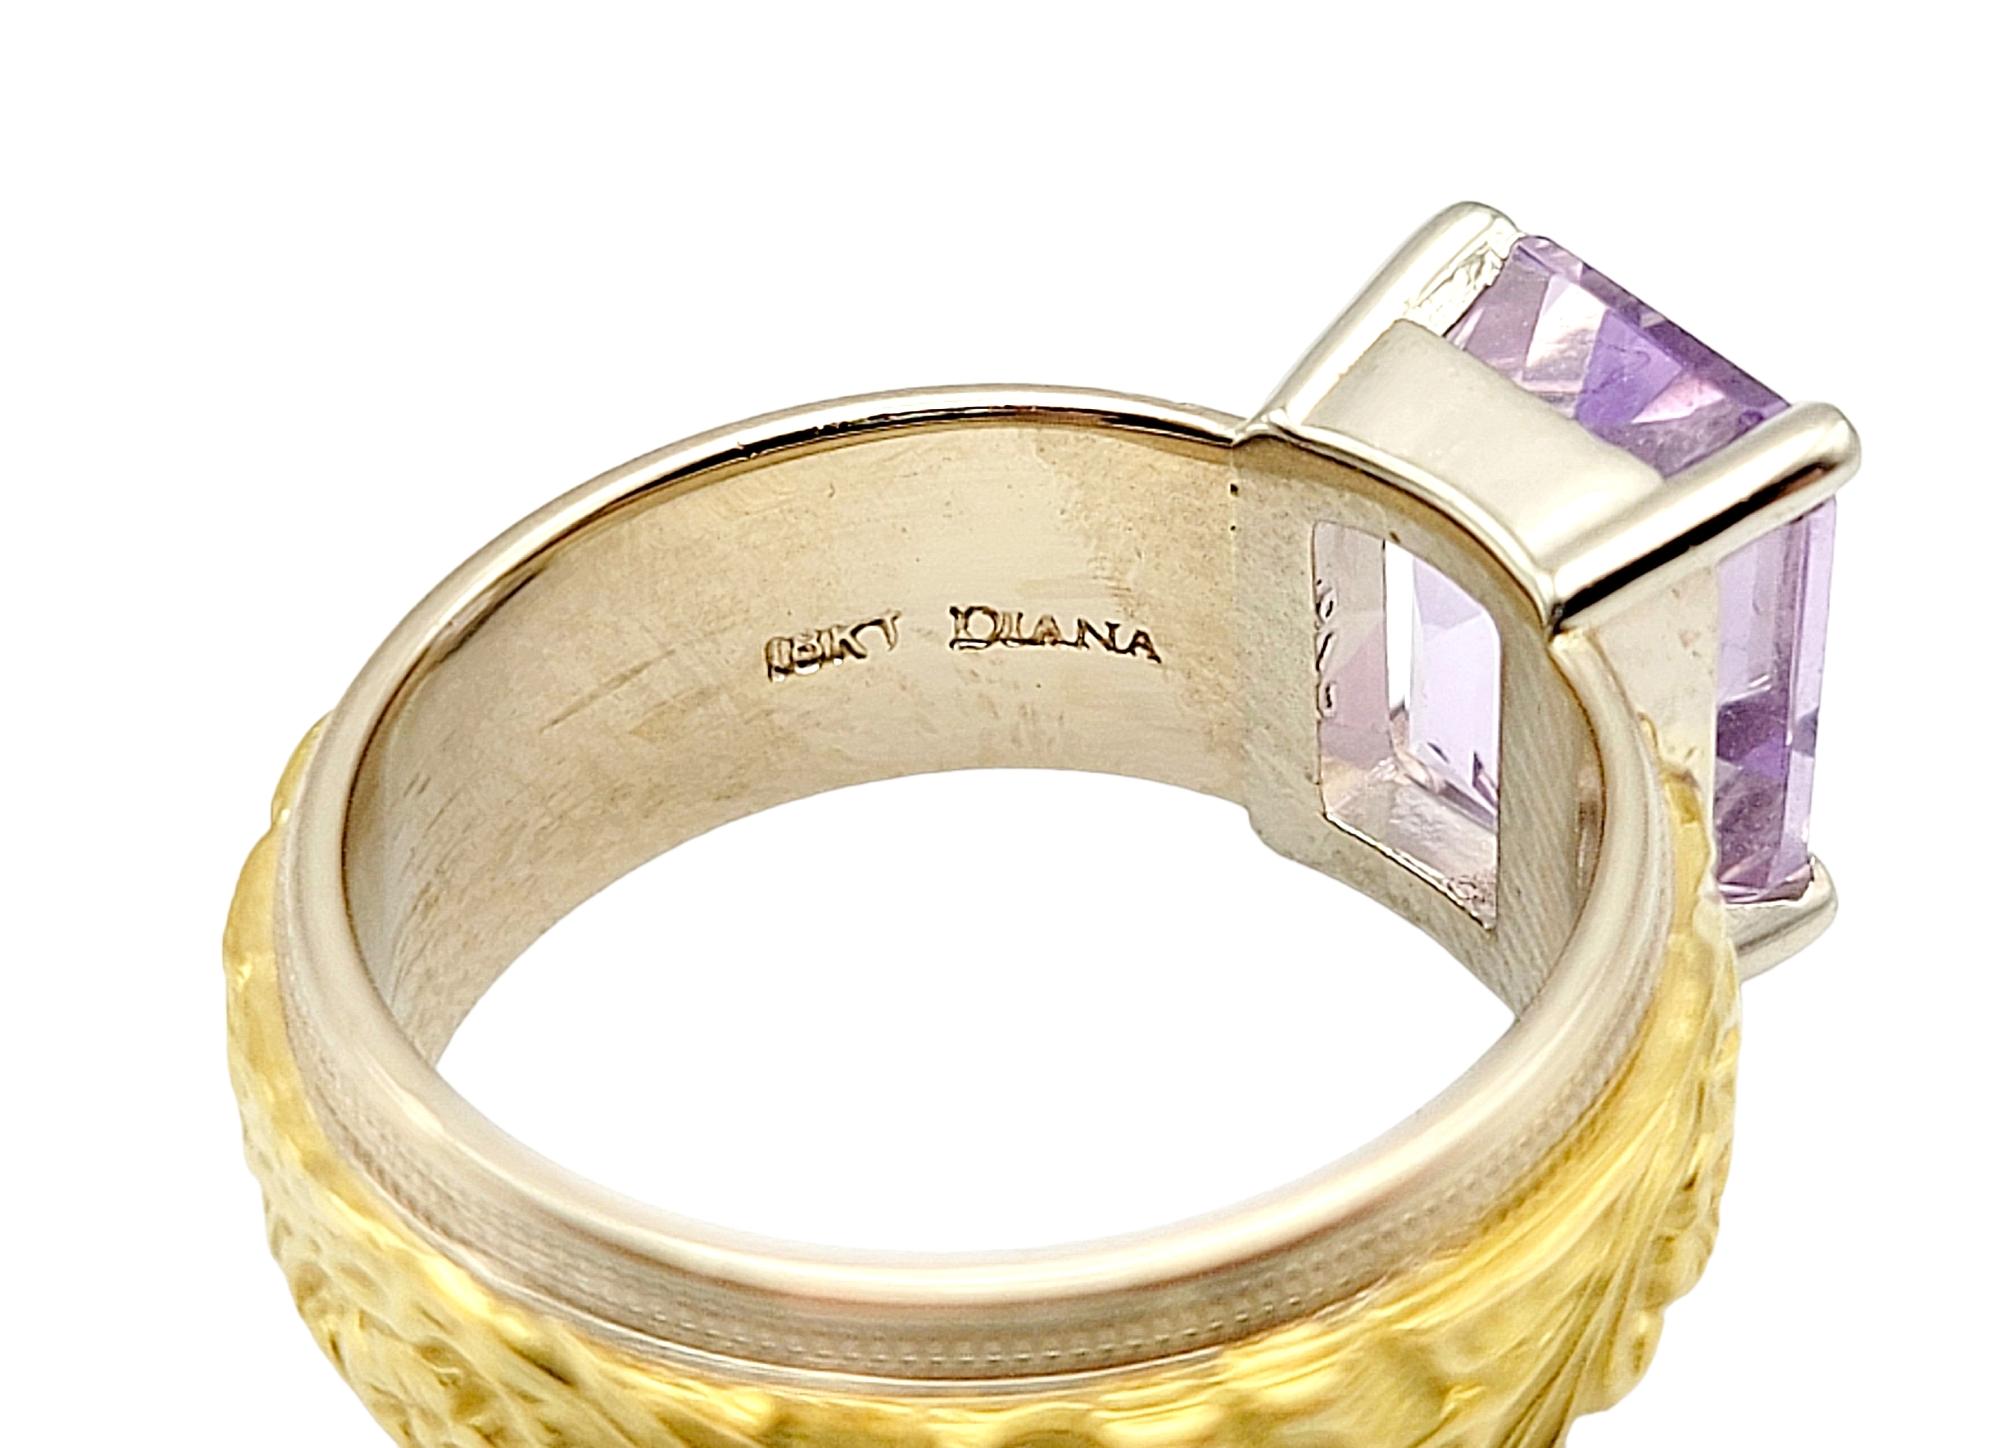 Emerald Cut Amethyst Solitaire Ring with Ornate Engraved Band in 18 Karat Gold For Sale 1